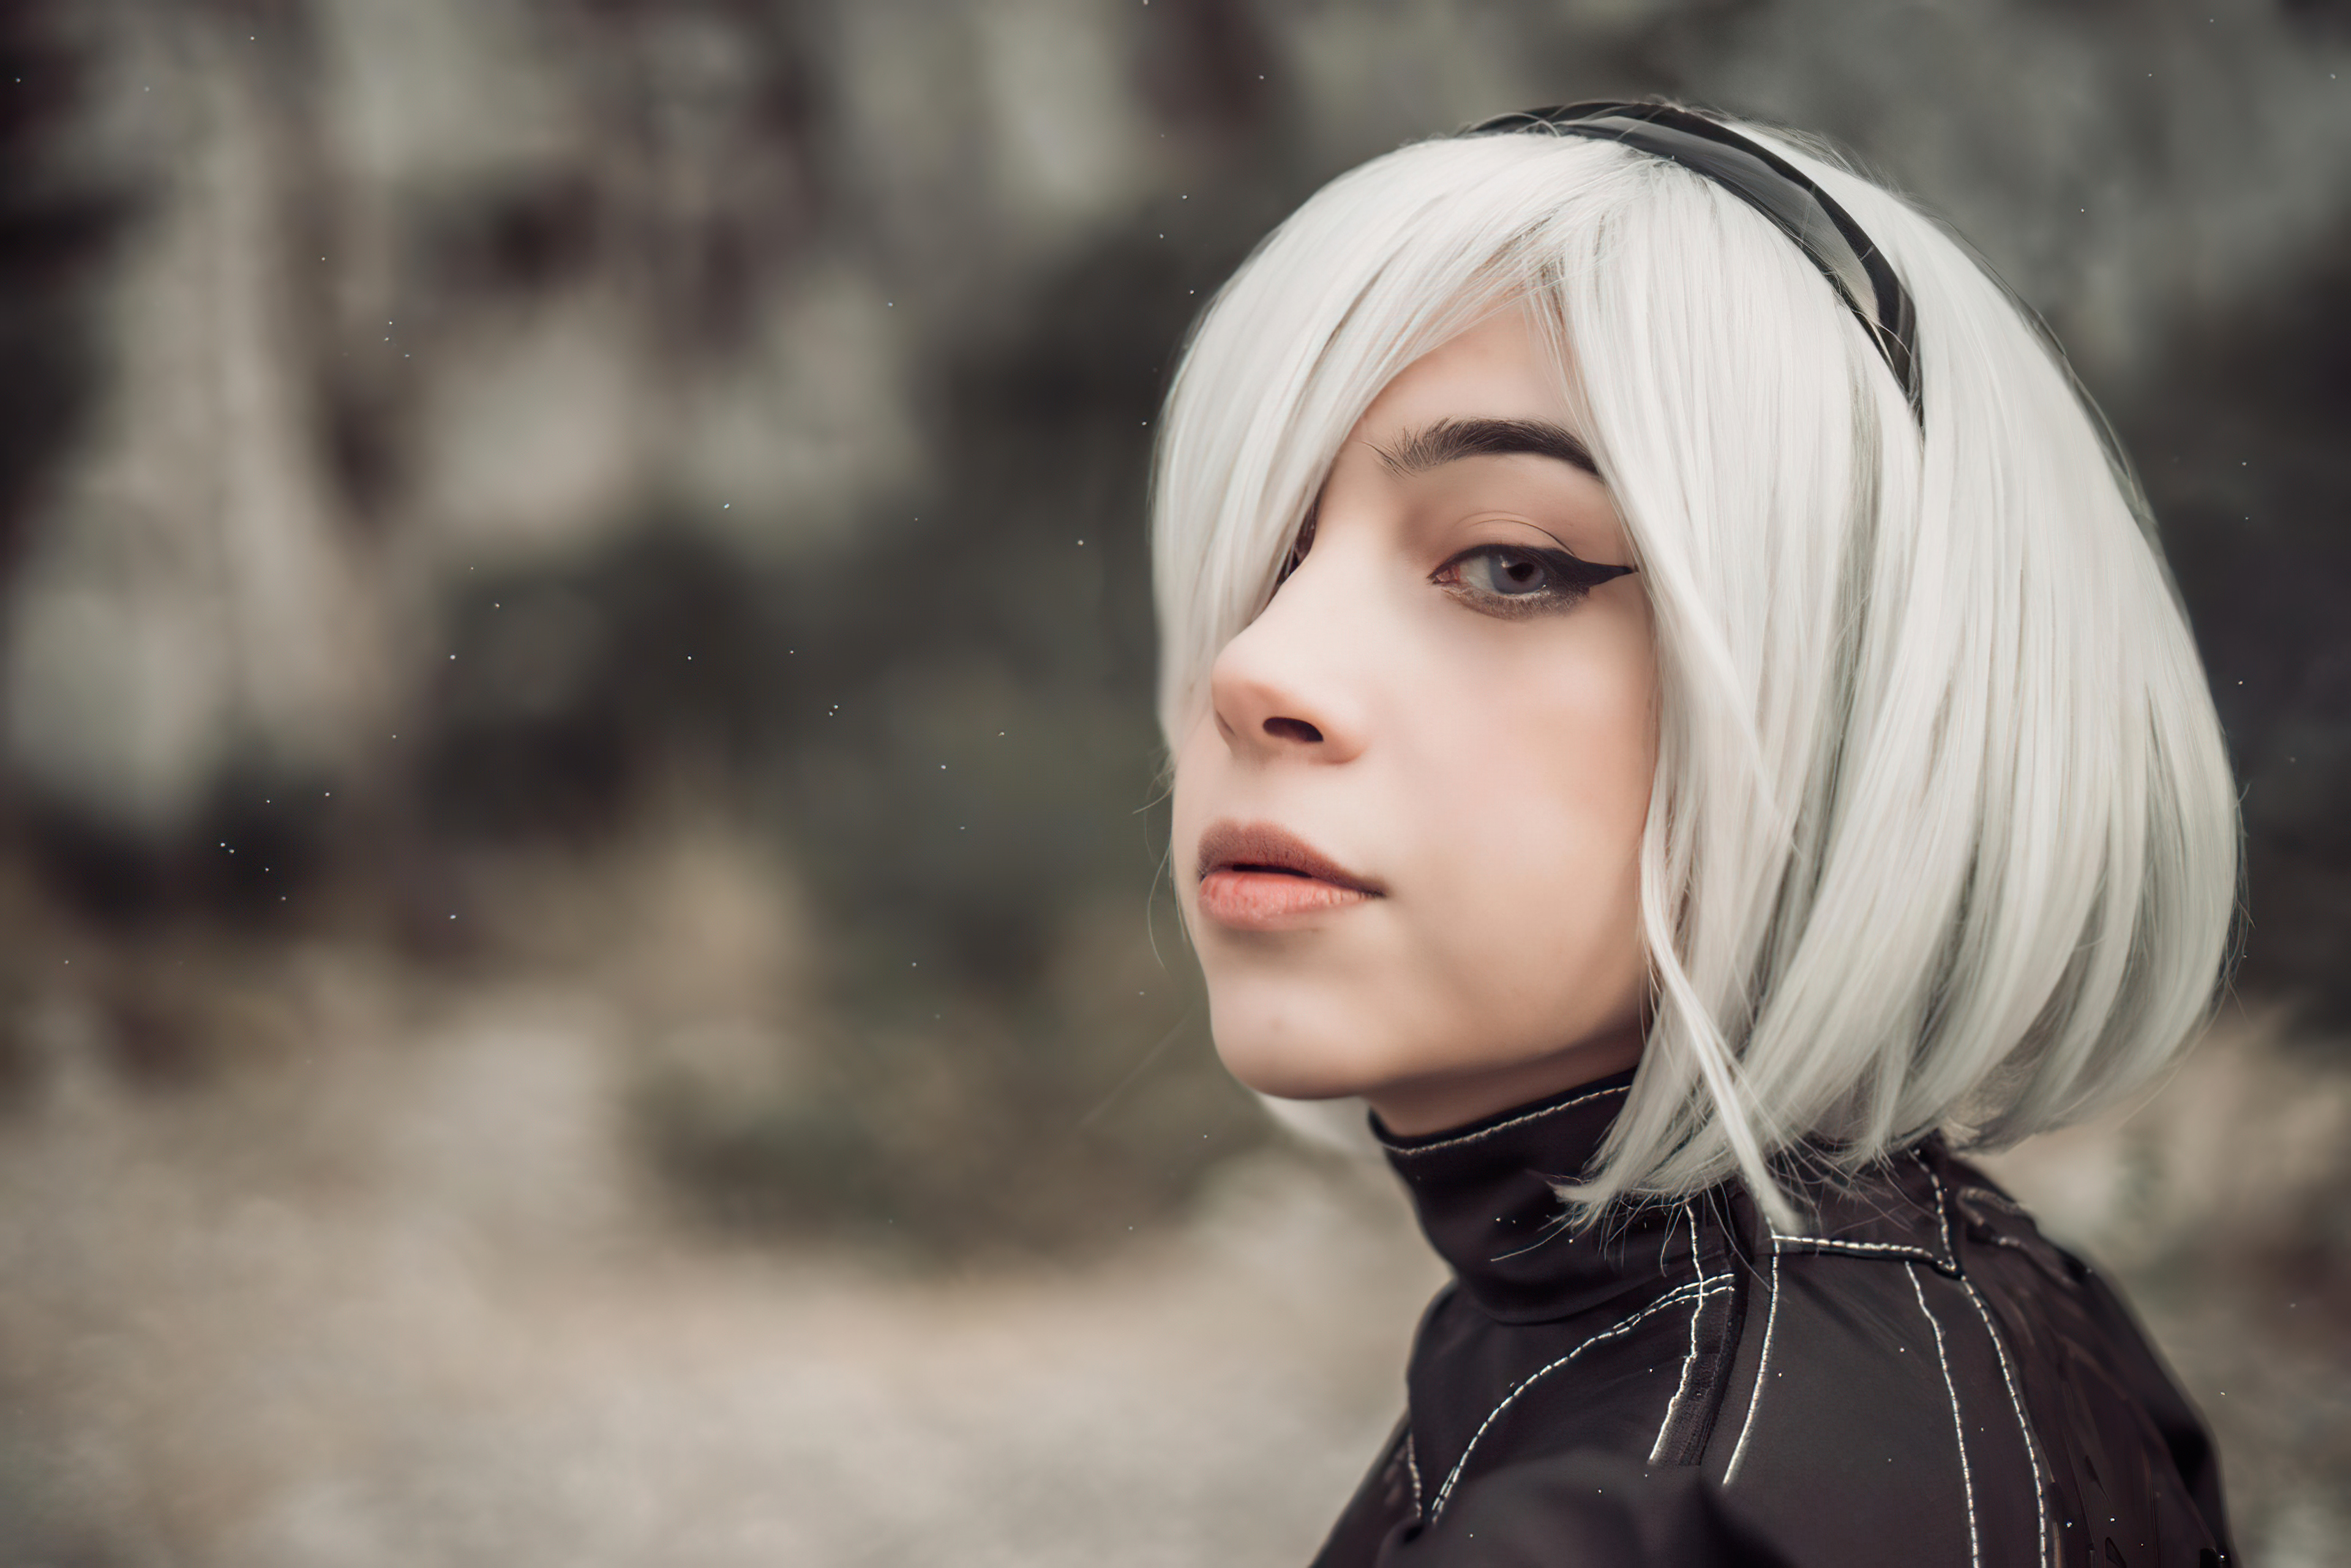 Free photo The girl from the game nier automata